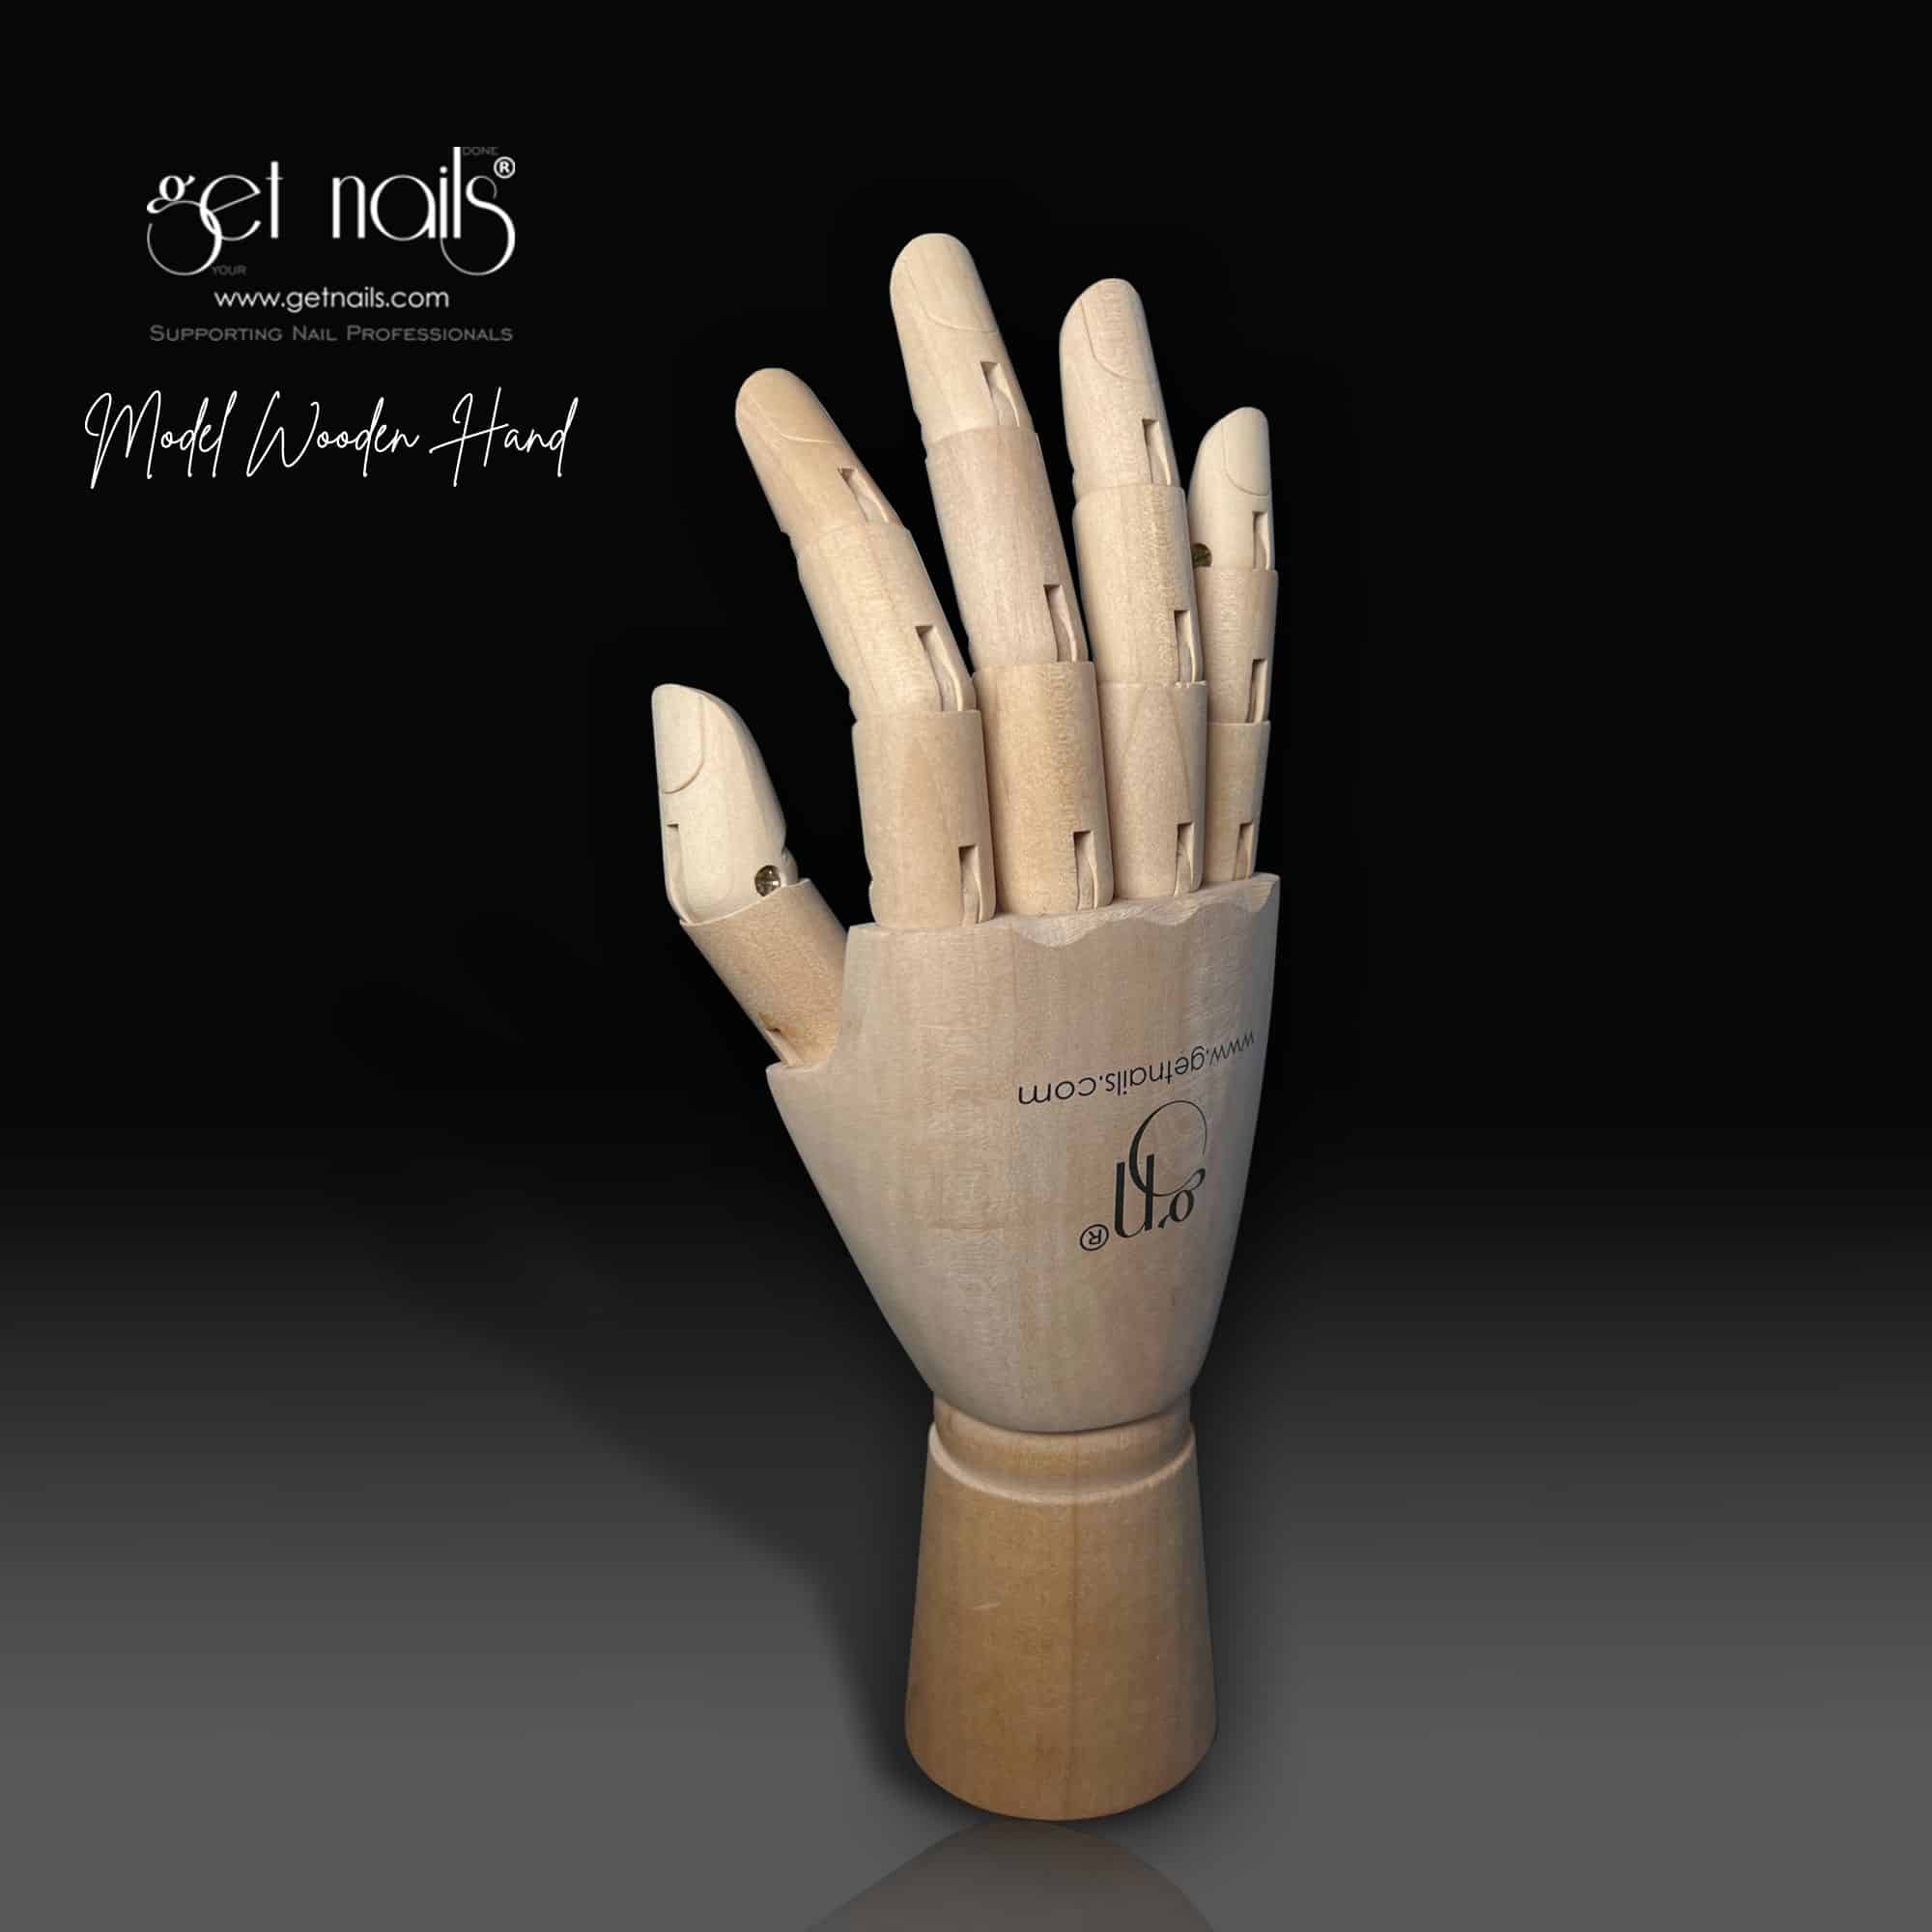 Get Nails Austria - Holzhand Modell